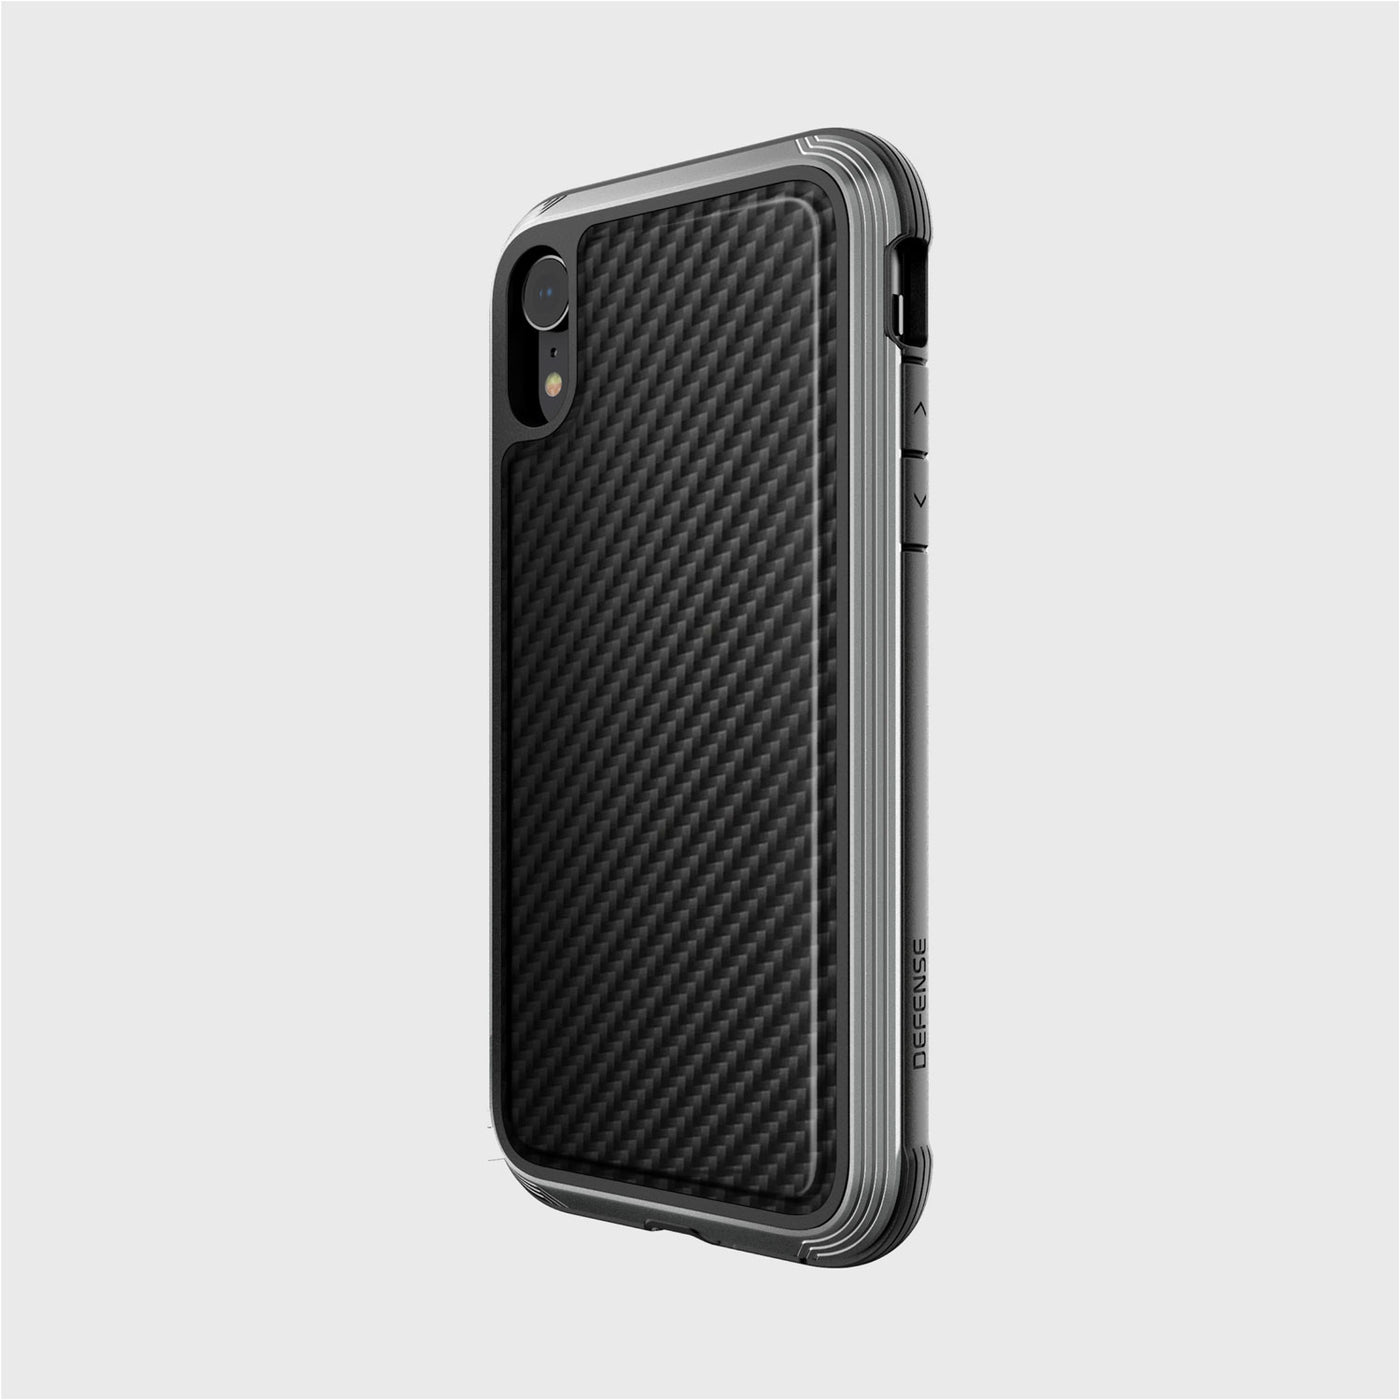 Luxurious Case for iPhone XR. Raptic Lux in black carbon fiber.